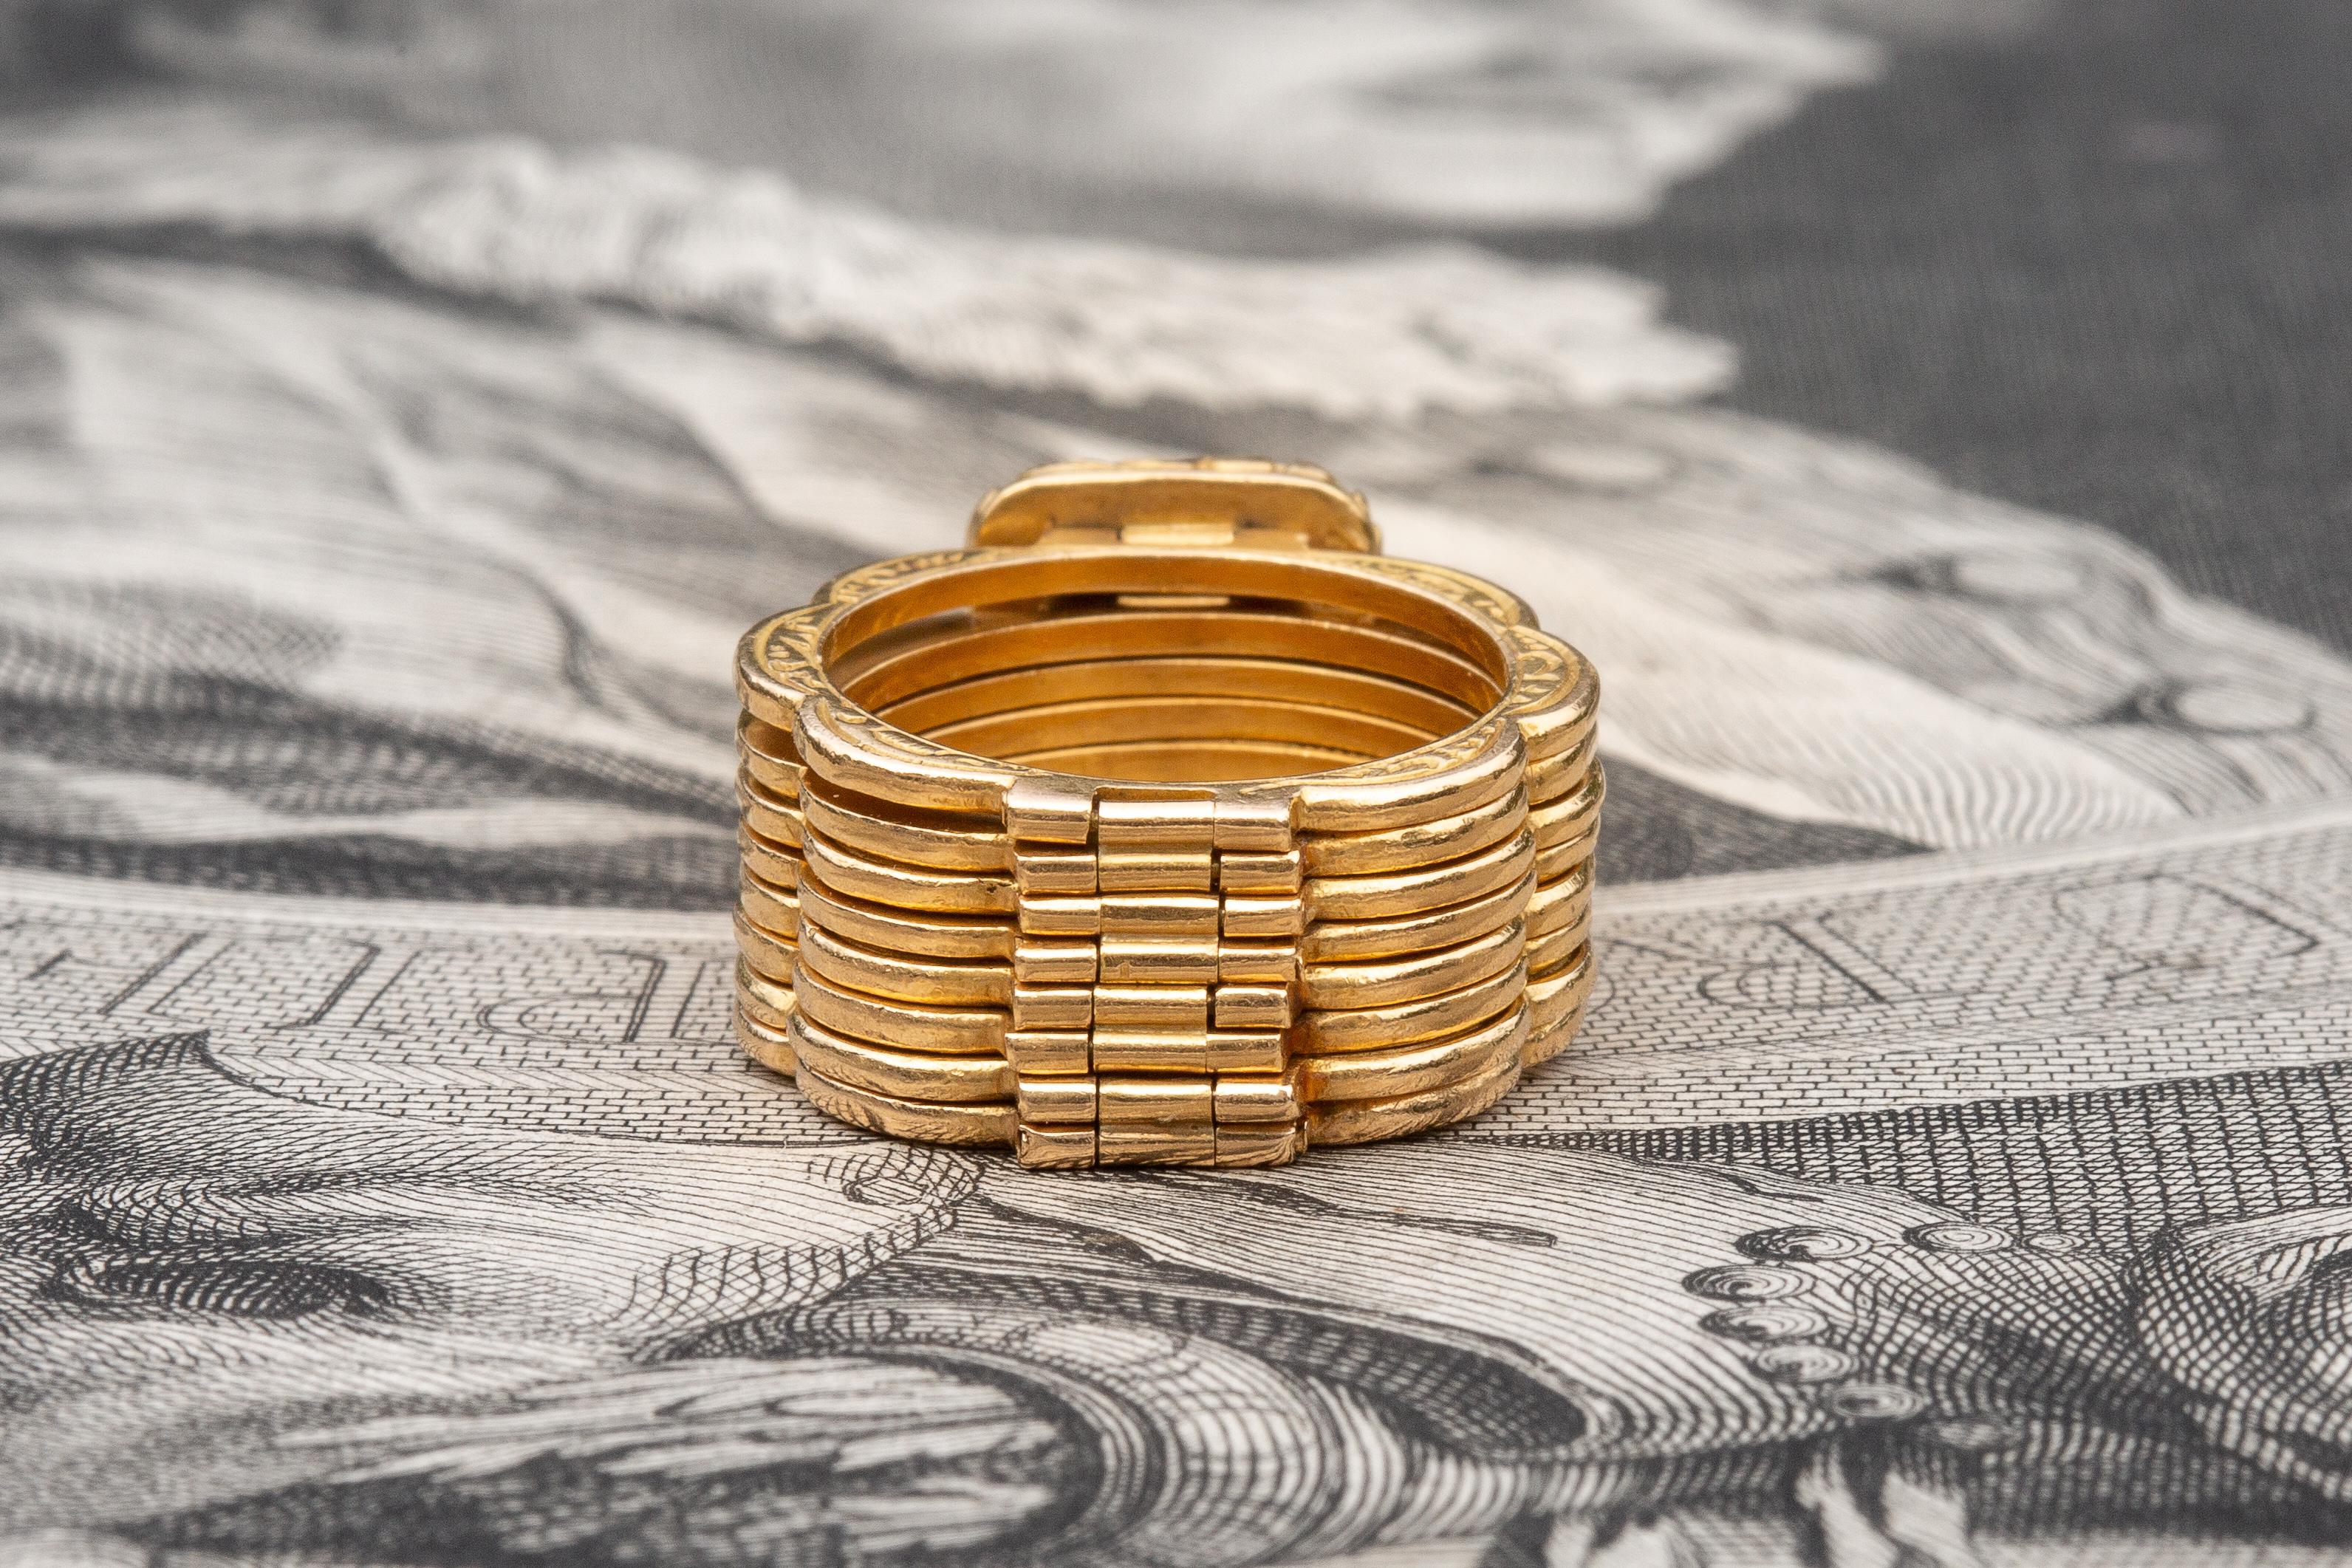 This exceptionally designed ring has a secret… It is also a bracelet!

The adaptable piece of jewellery was originally made in France and has hallmarks which date it to between 1838 and 1847. It is made up of eight articulated folding panels, each